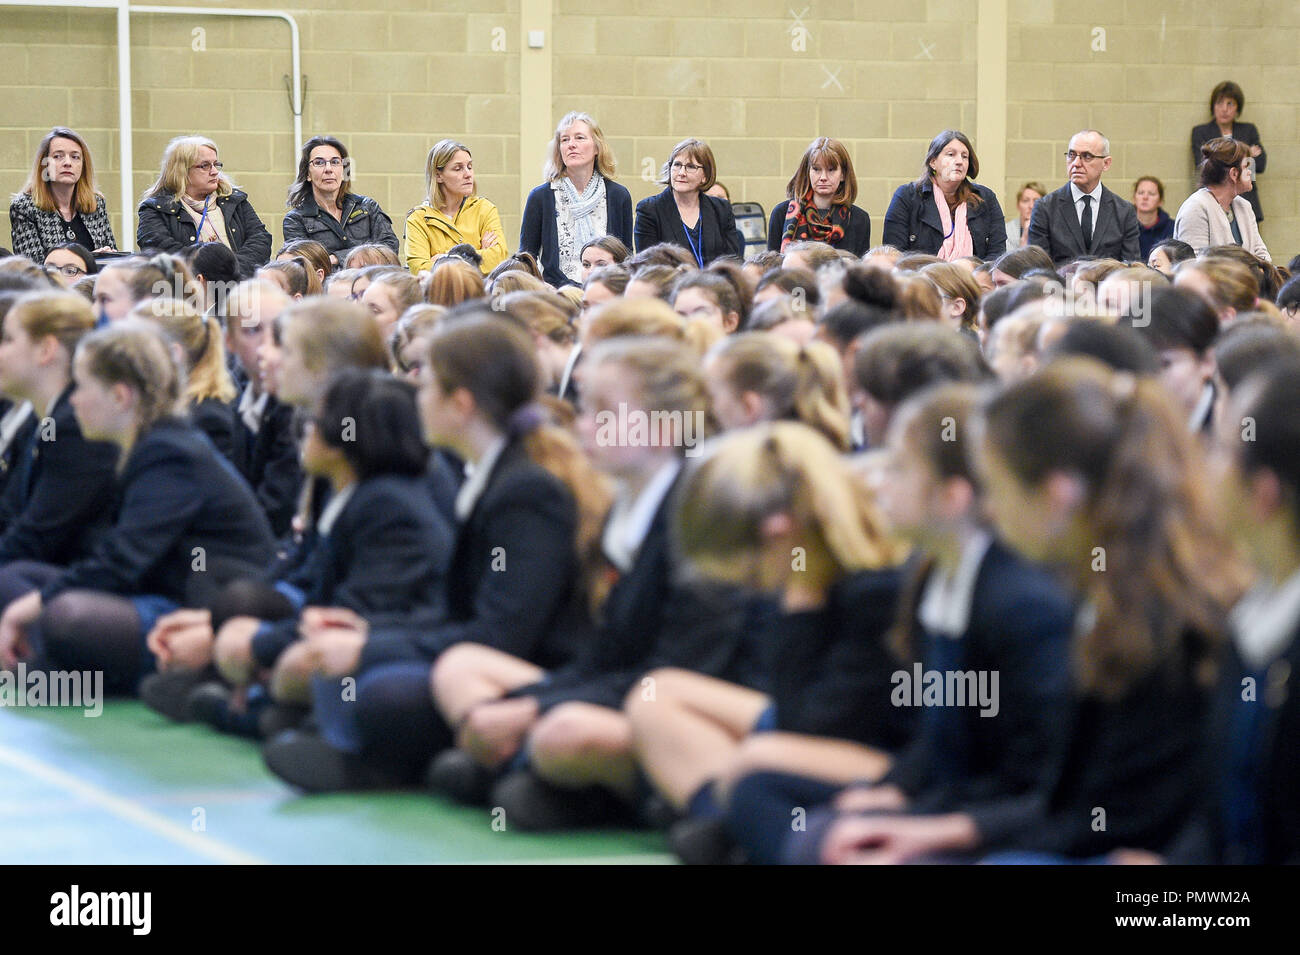 Students Sit Cross Legged During Morning Assembly In The Gymnasium At Royal High School Bath Which Is A Day And Boarding School For Girls Aged 3 18 And Also Part Of The Girls